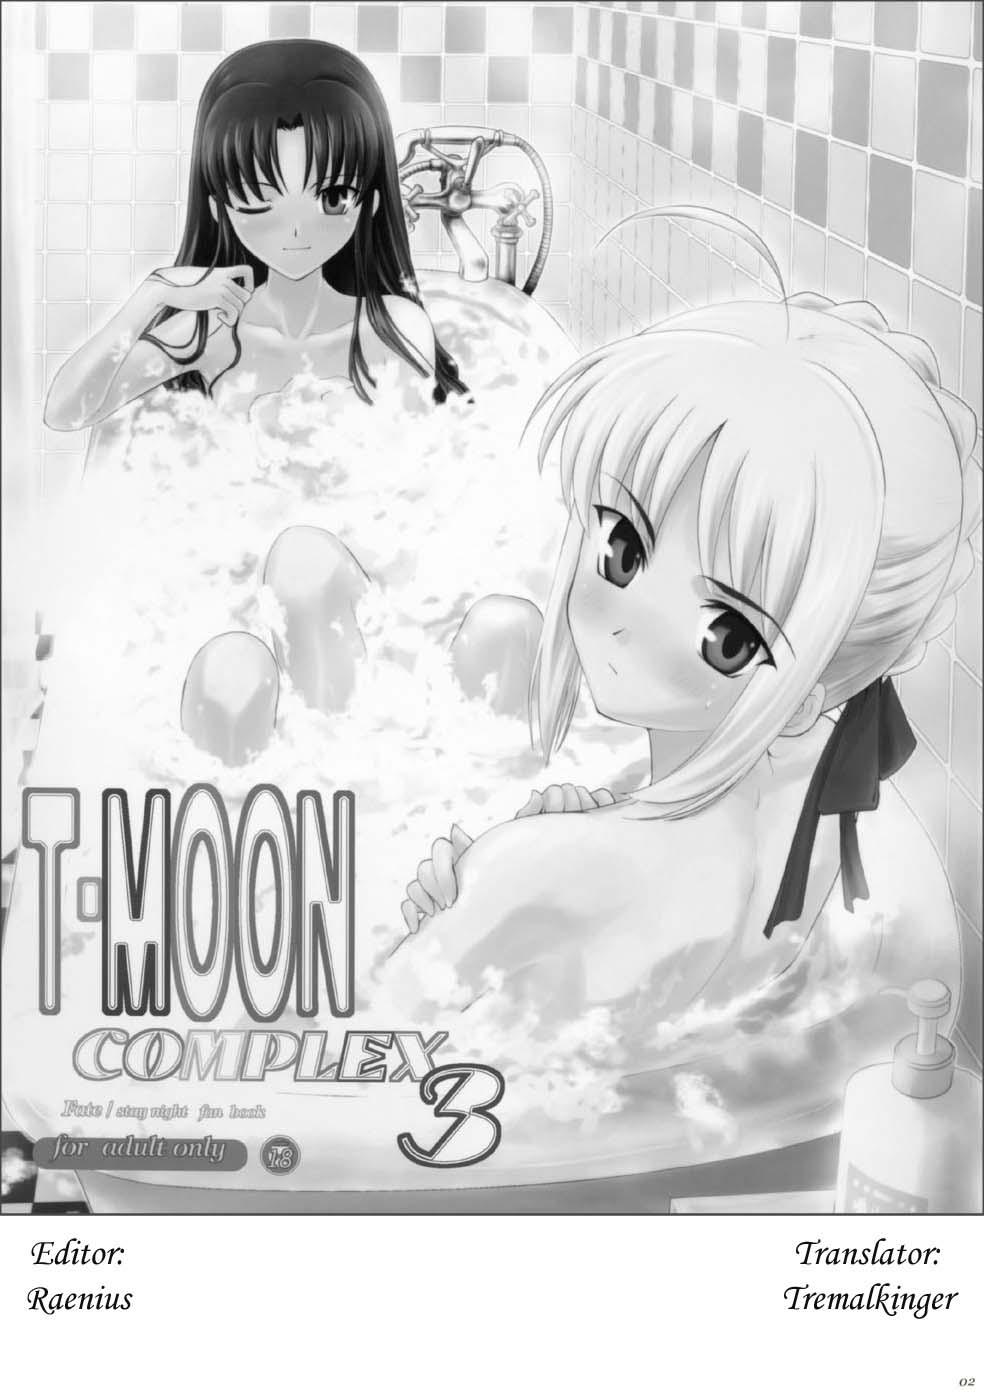 Teenager T-MOON COMPLEX 3 - Fate stay night Ghetto - Page 2